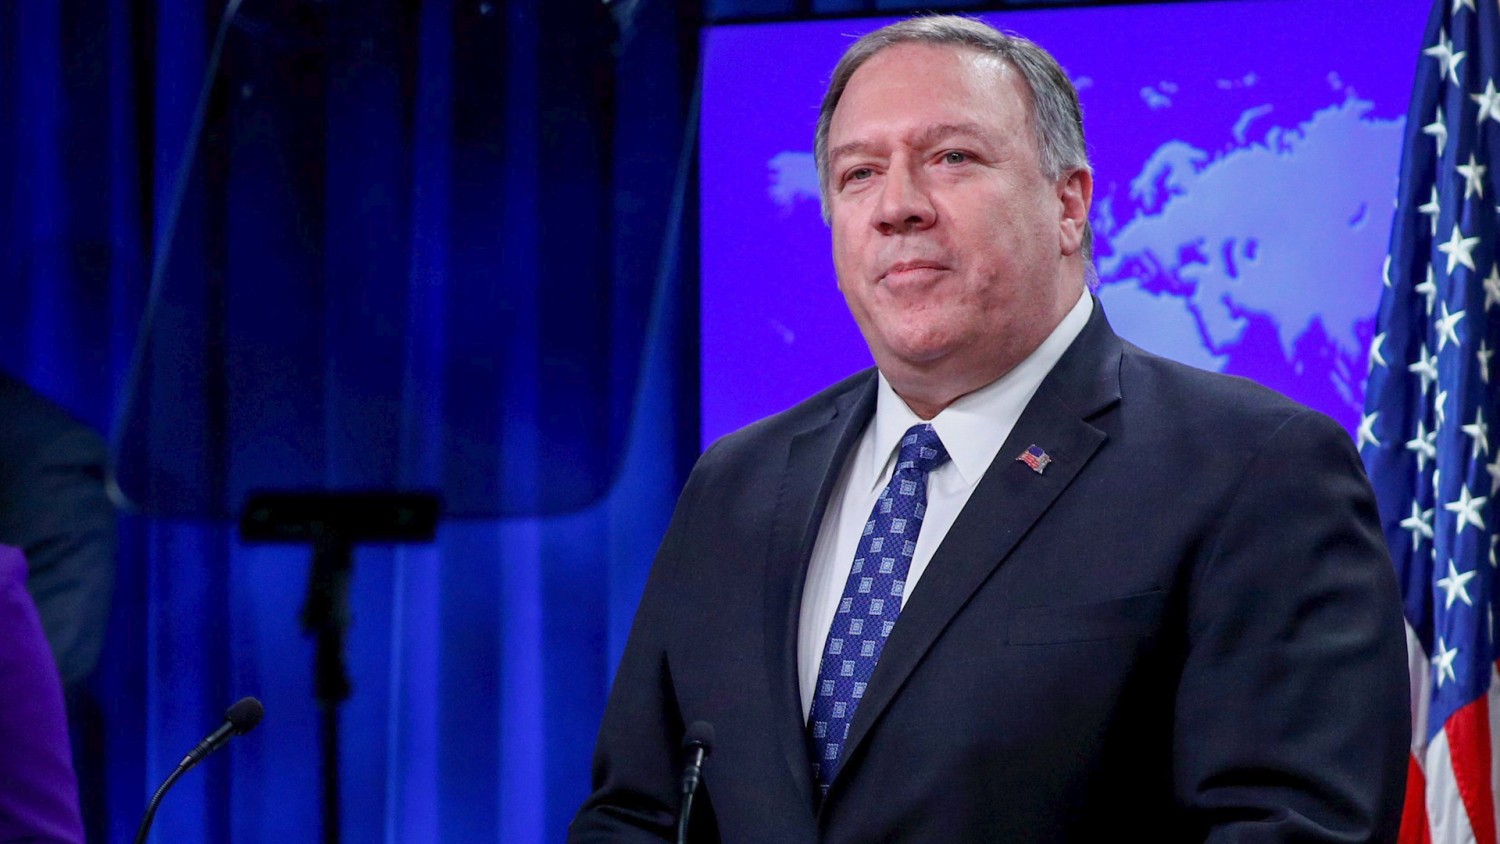 Secretary of State Mike Pompeo said President Trump’s decision to kill Maj. Gen. Qassem Soleimani was legal and part of a larger U.S. strategy against Iran. Photo: Tom Brenner/Reuters